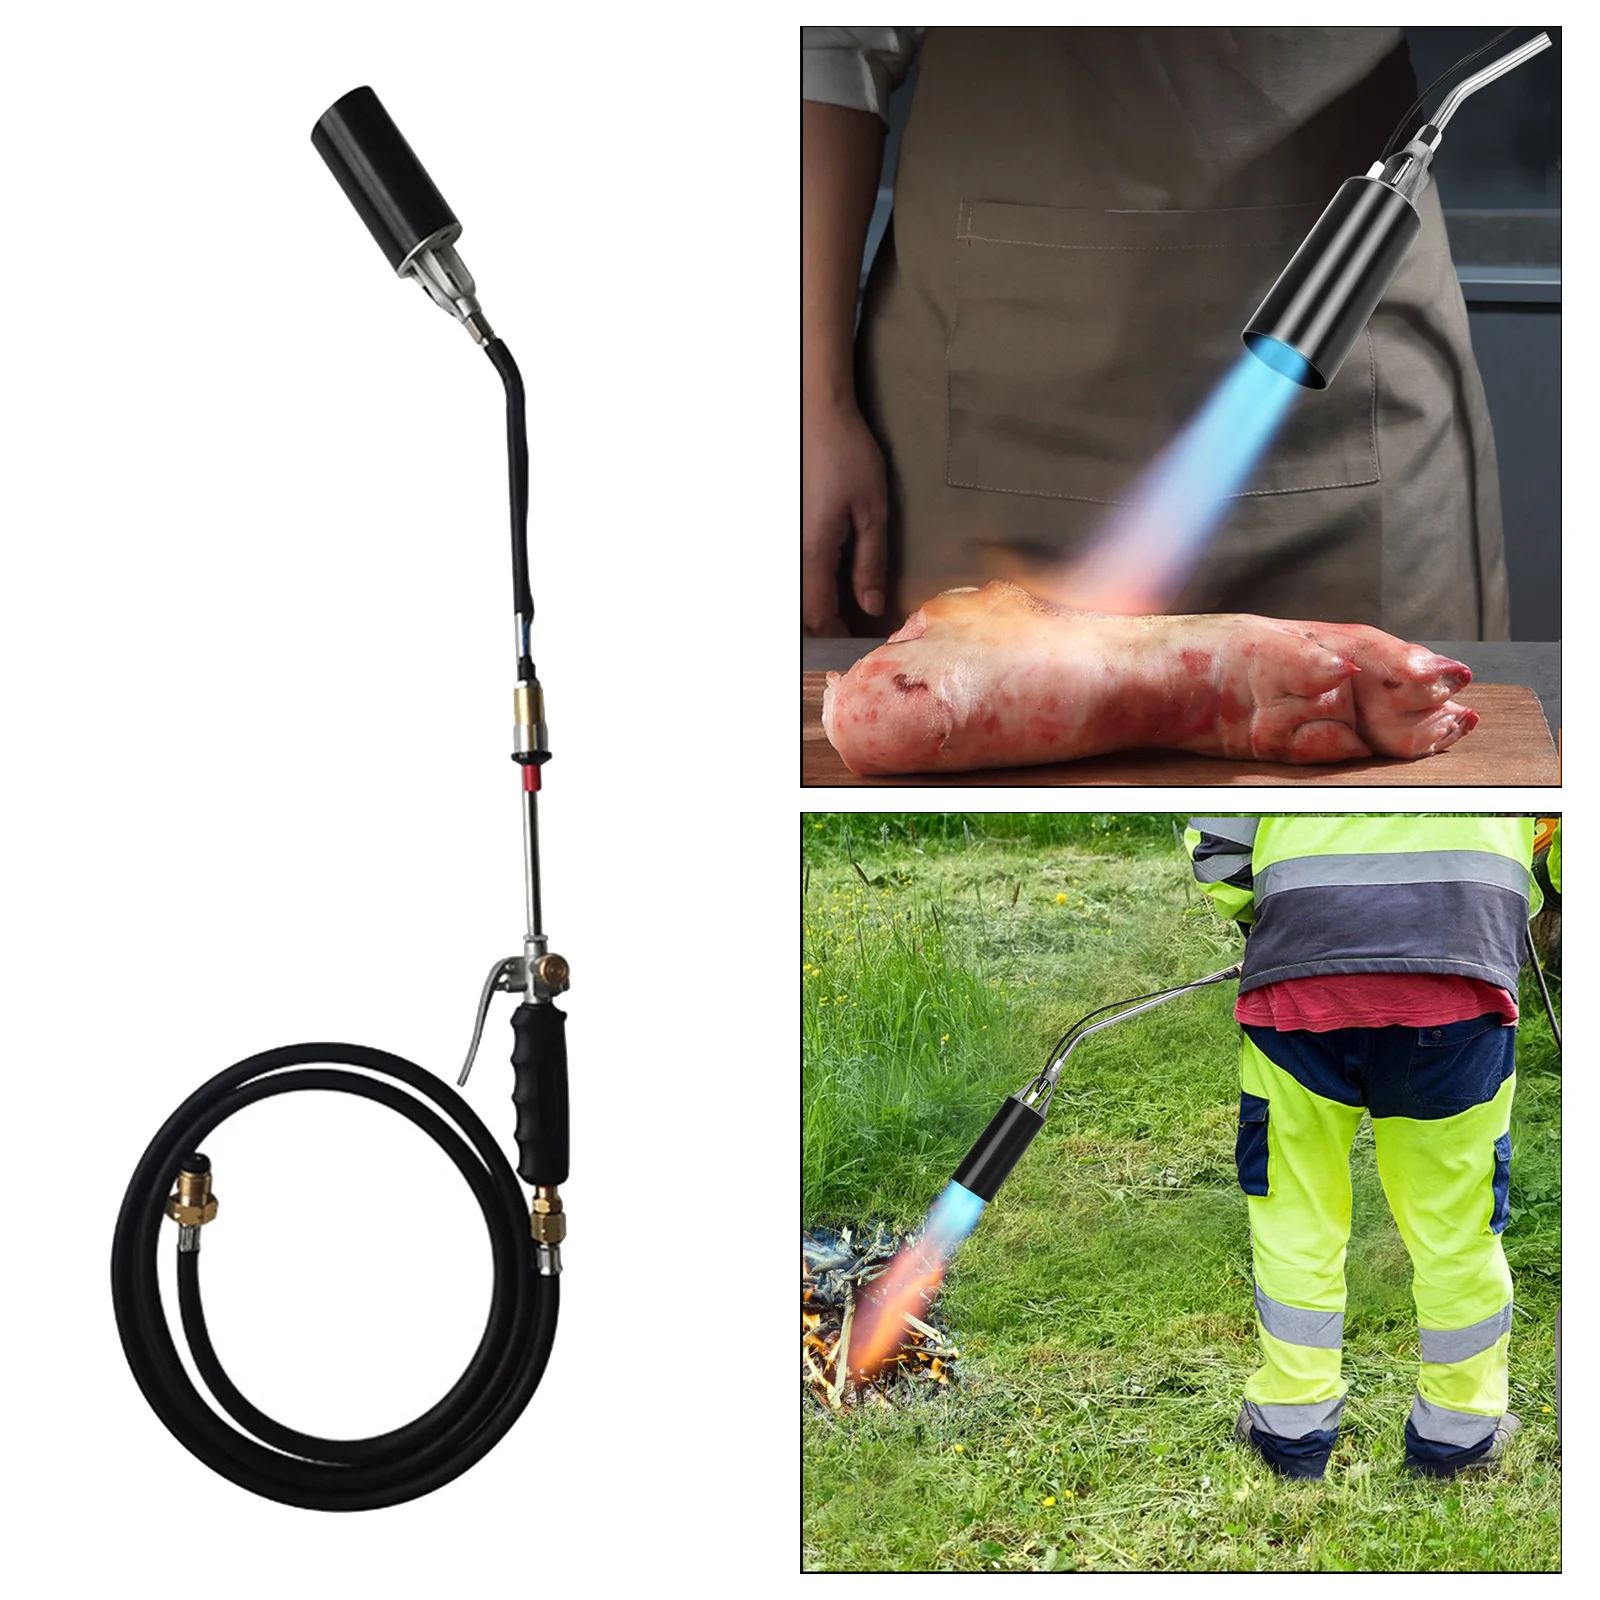 Propane Torch Weed Burner Portable Propane Heating Torch Ice Snow Melter with Hose LPG Torch with Adjustable Flame Control for Outdoor Weeding Machine for Weeds/Snow Melter/Roofing/Roads & More 